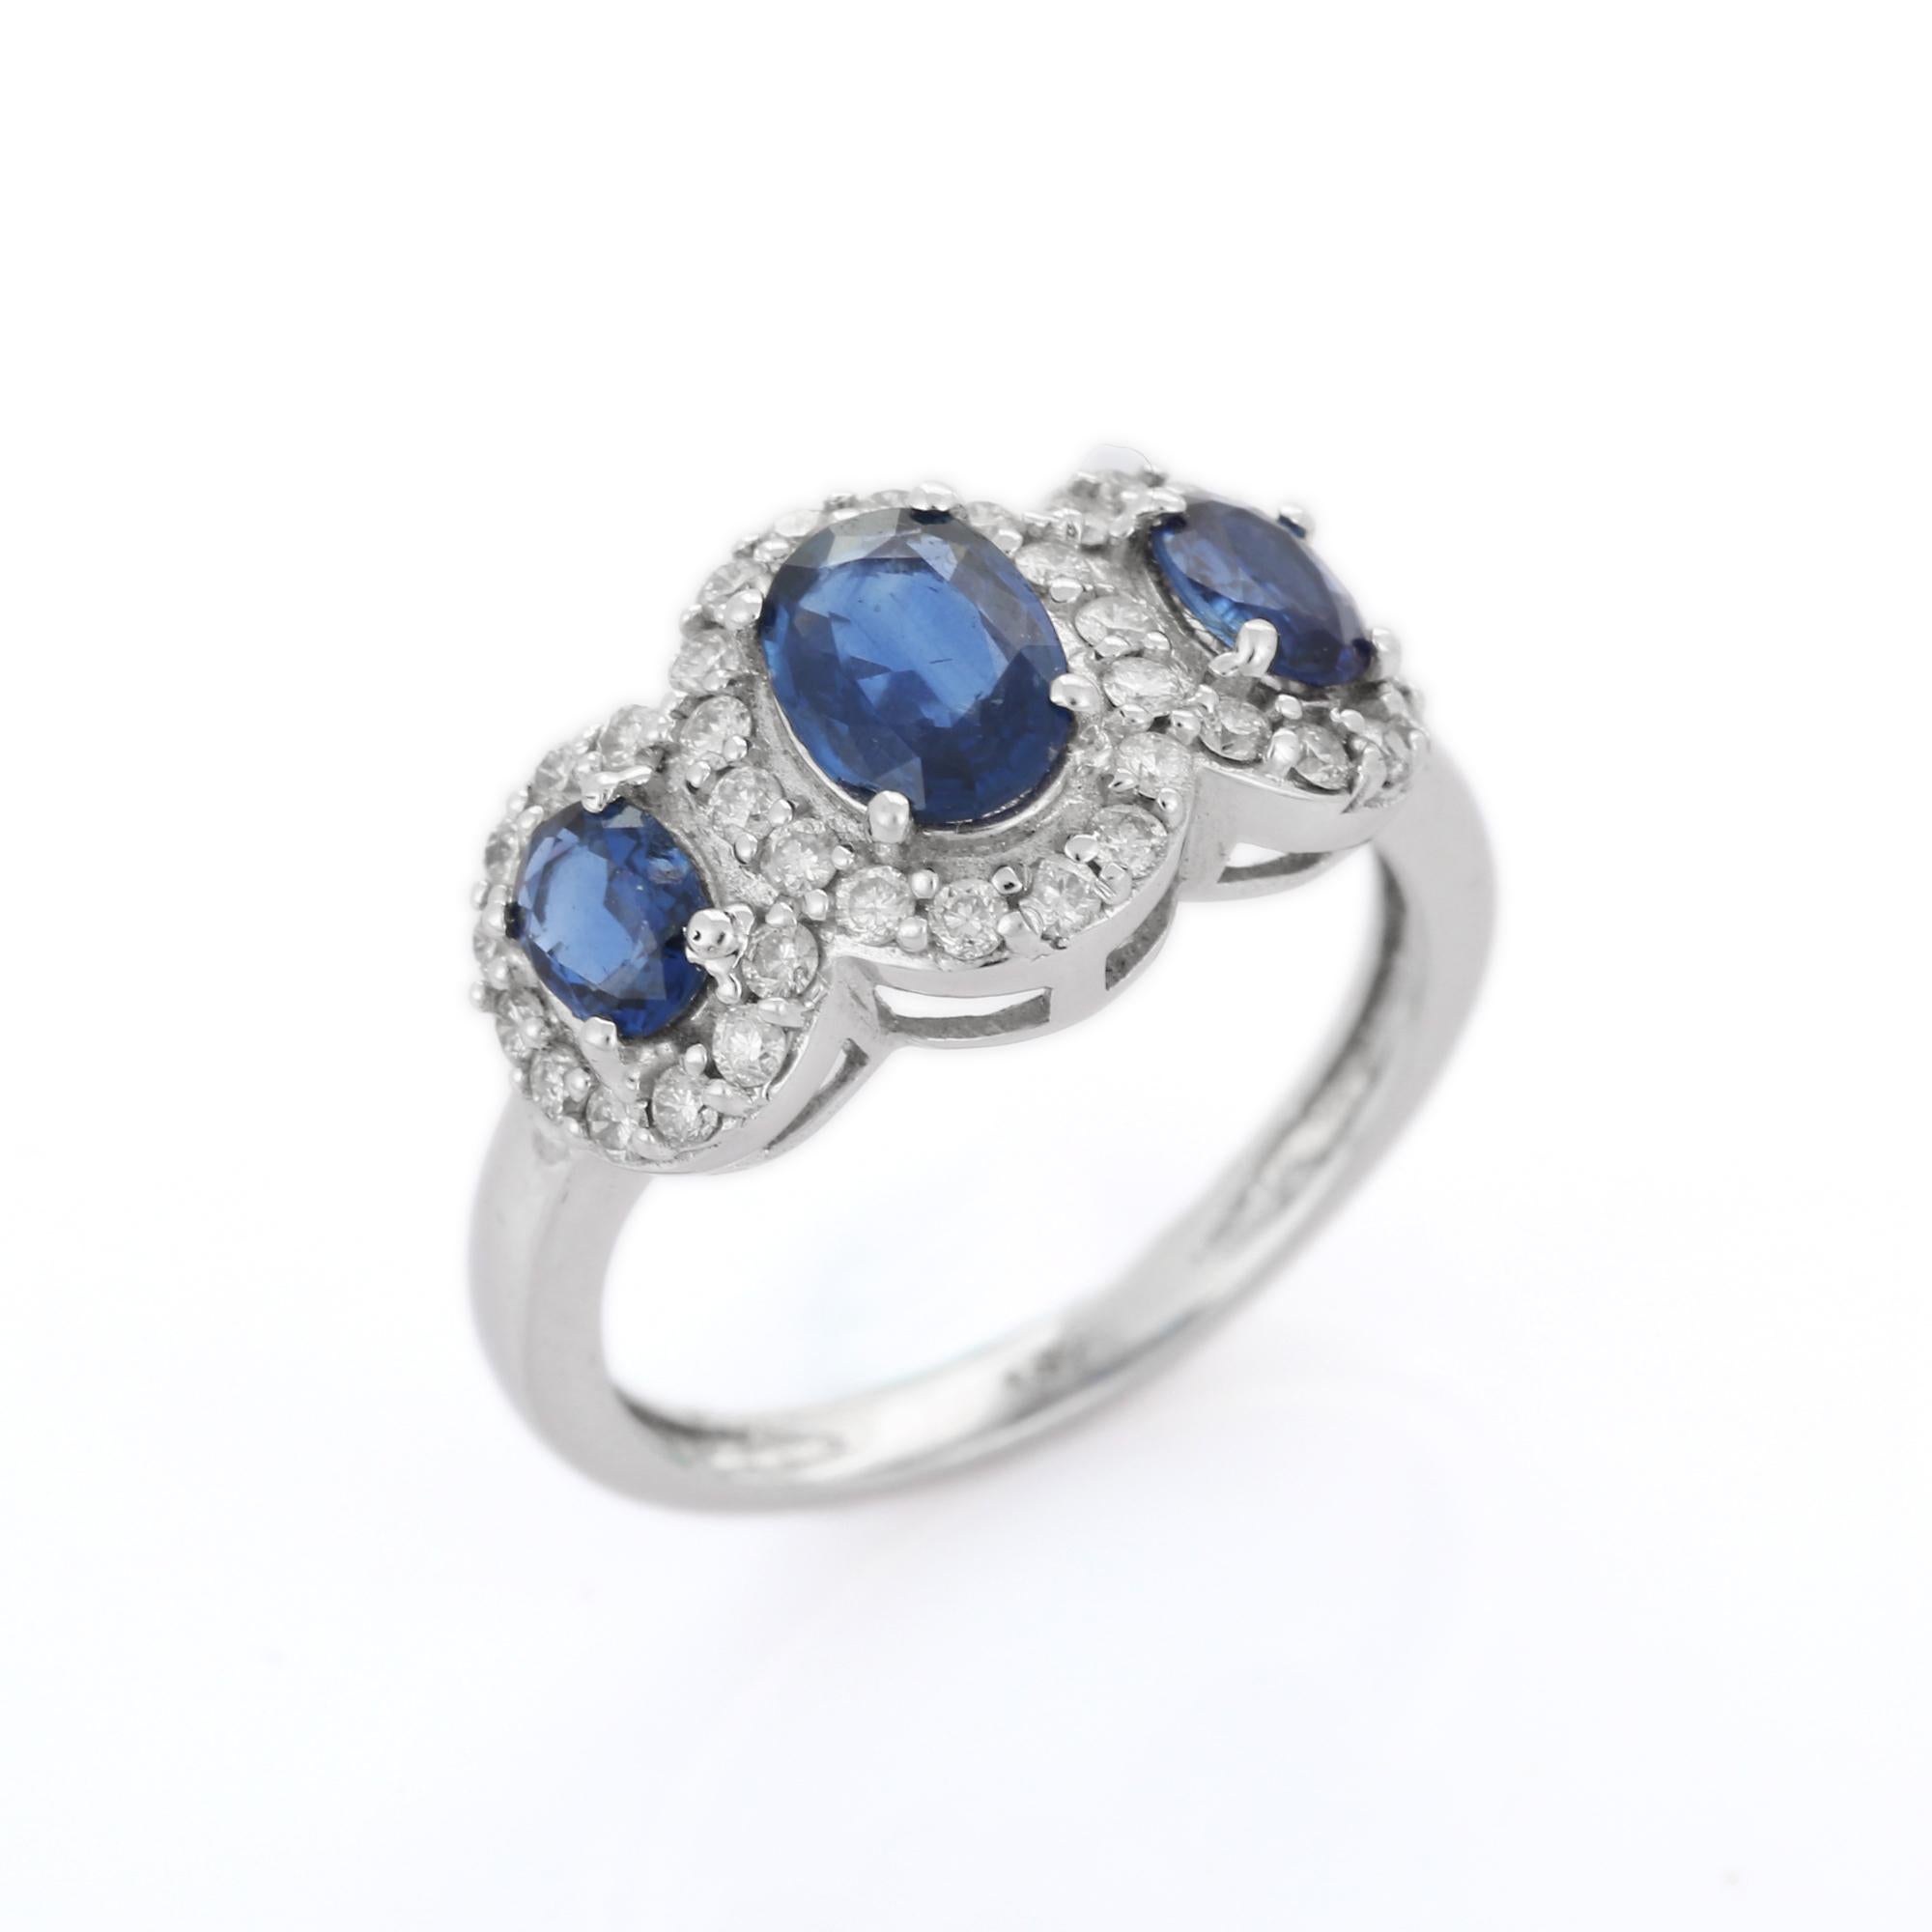 For Sale:  18k Solid White Gold Halo Diamond and Blue Sapphire Three-Stone Engagement Ring 2